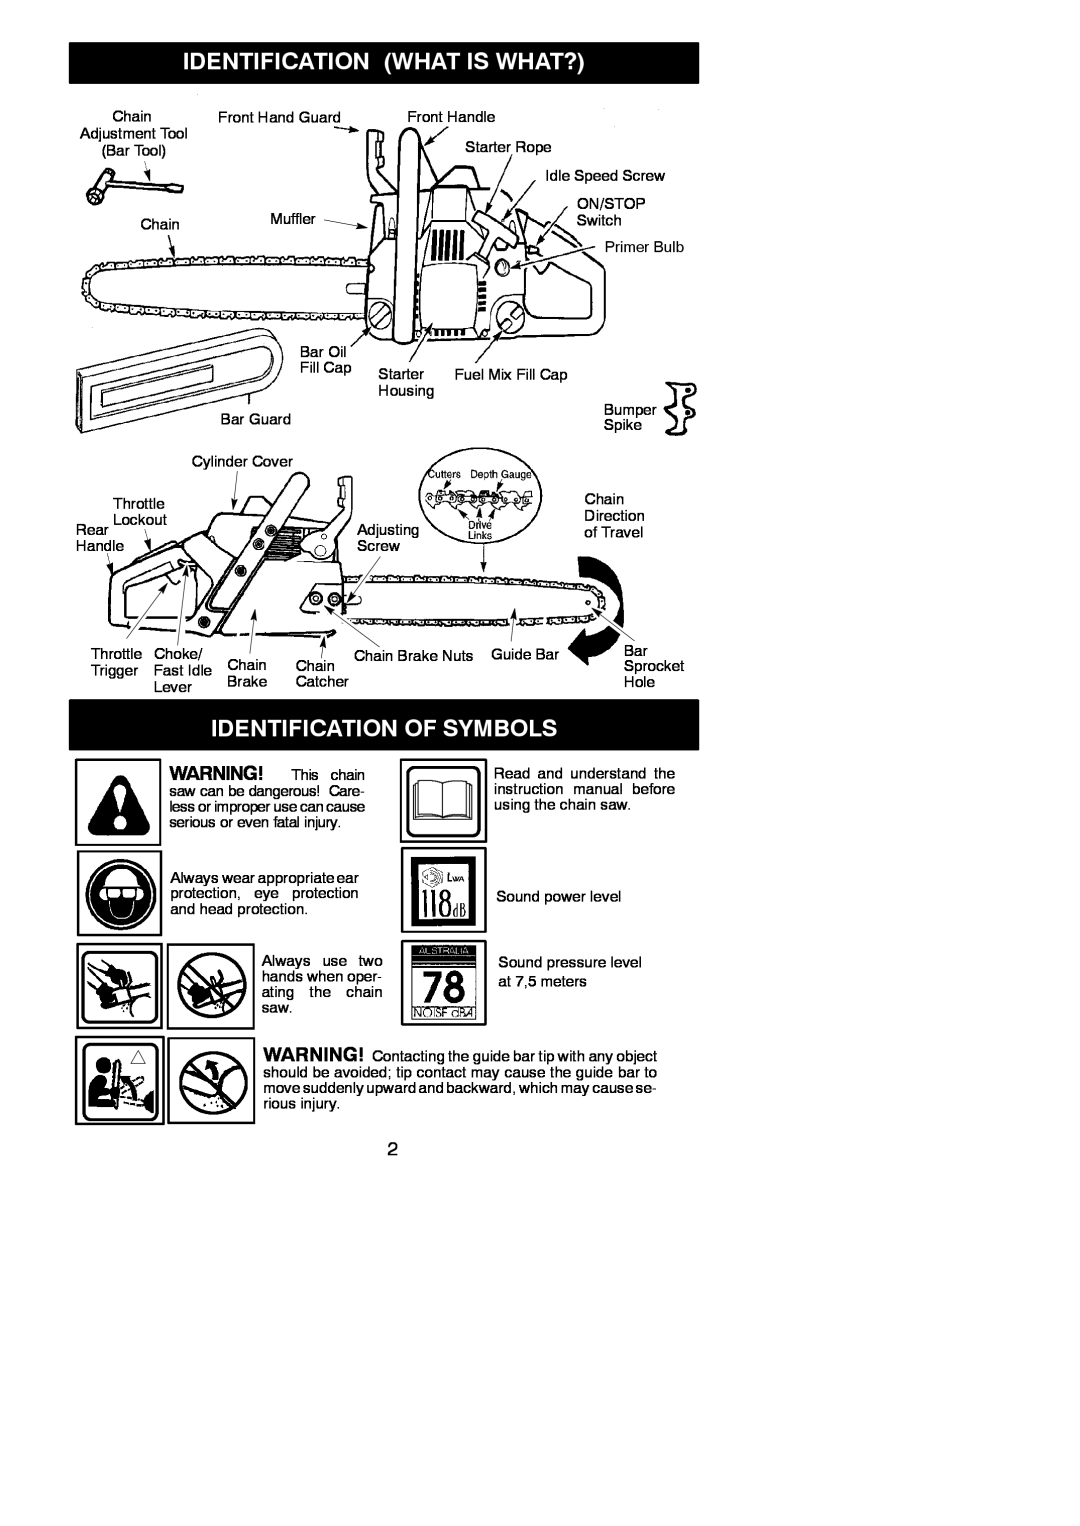 McCulloch M3414, M3616 instruction manual Identification What Is What?, Identification Of Symbols 